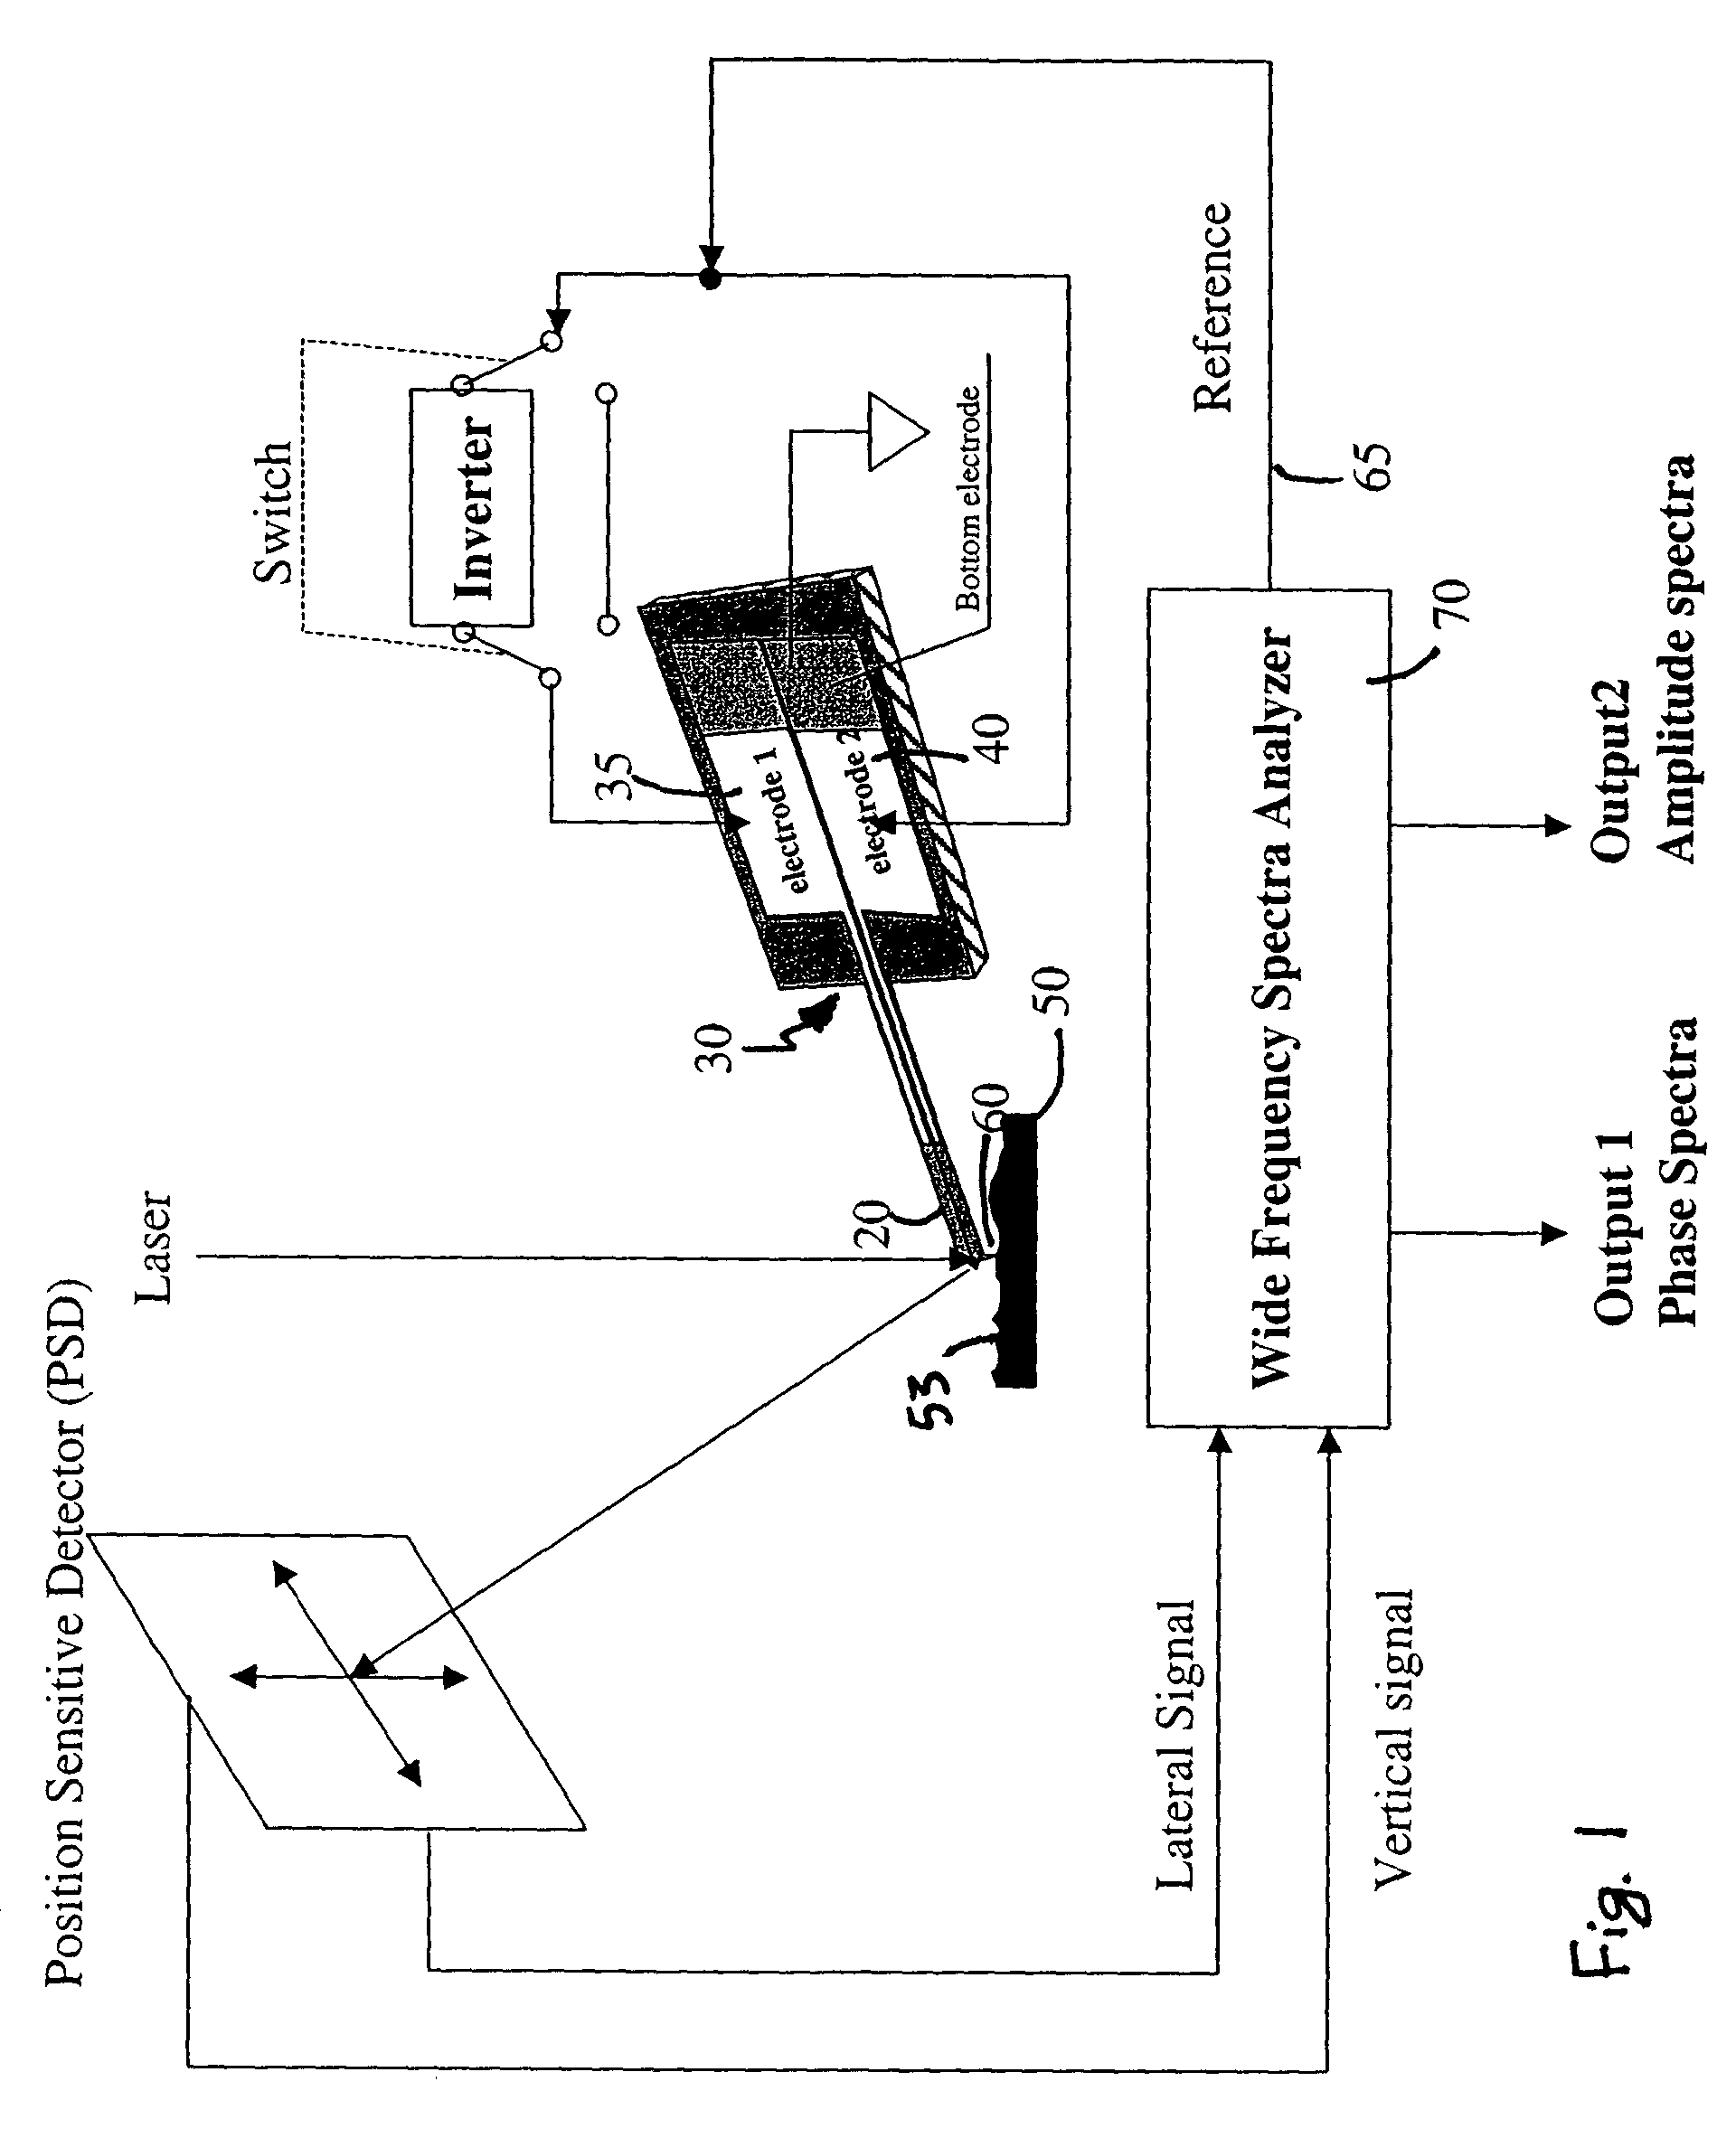 System for wide frequency dynamic nanomechanical analysis